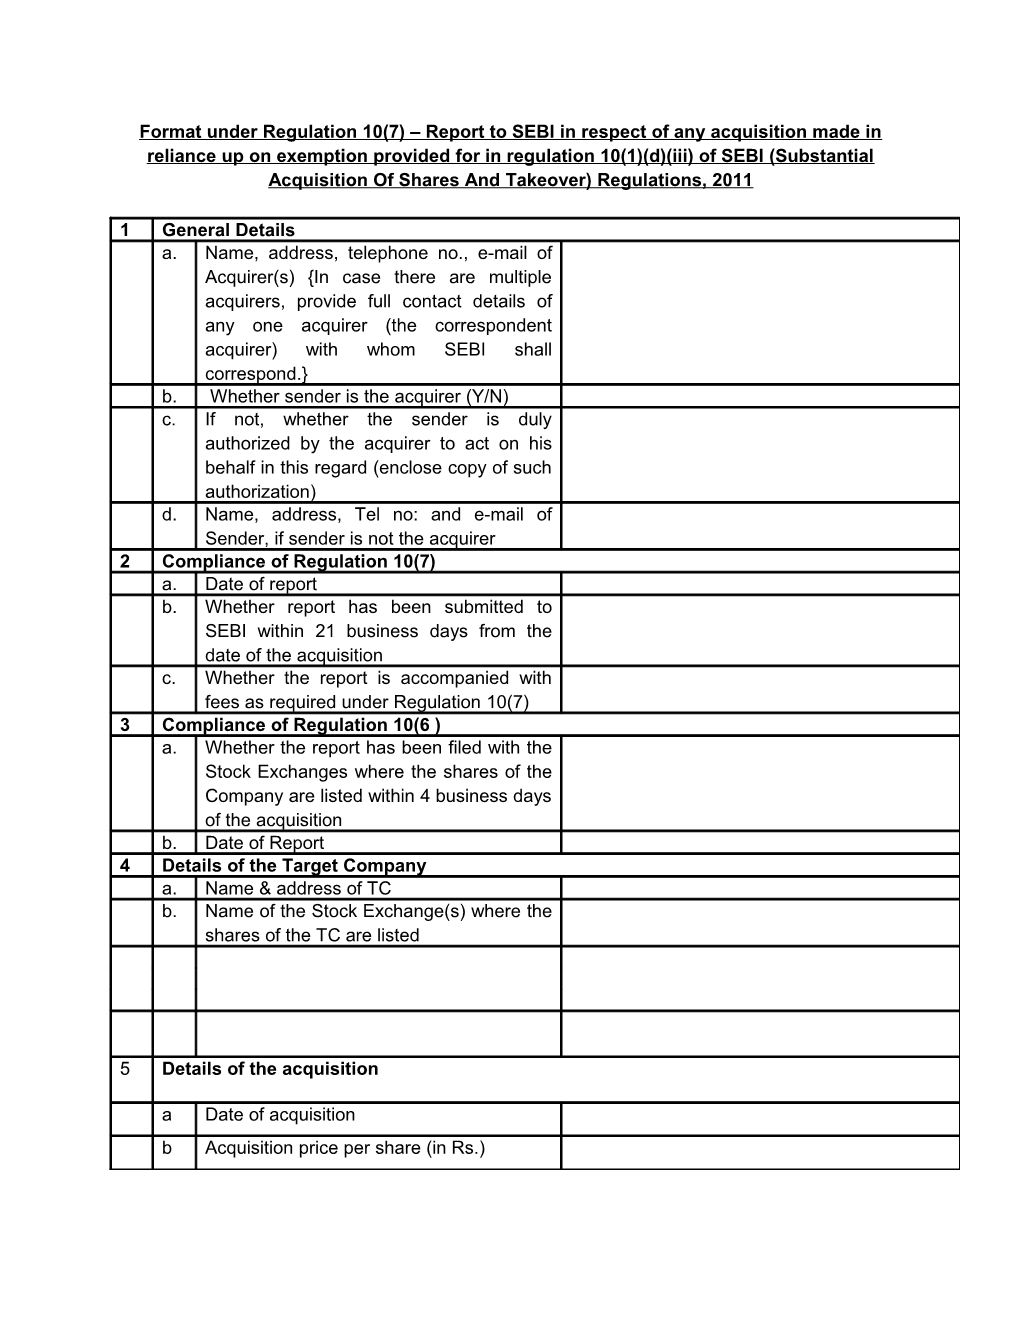 Format Under Regulation 10(7) Report to SEBI in Respect of Any Acquisition Made in Reliance